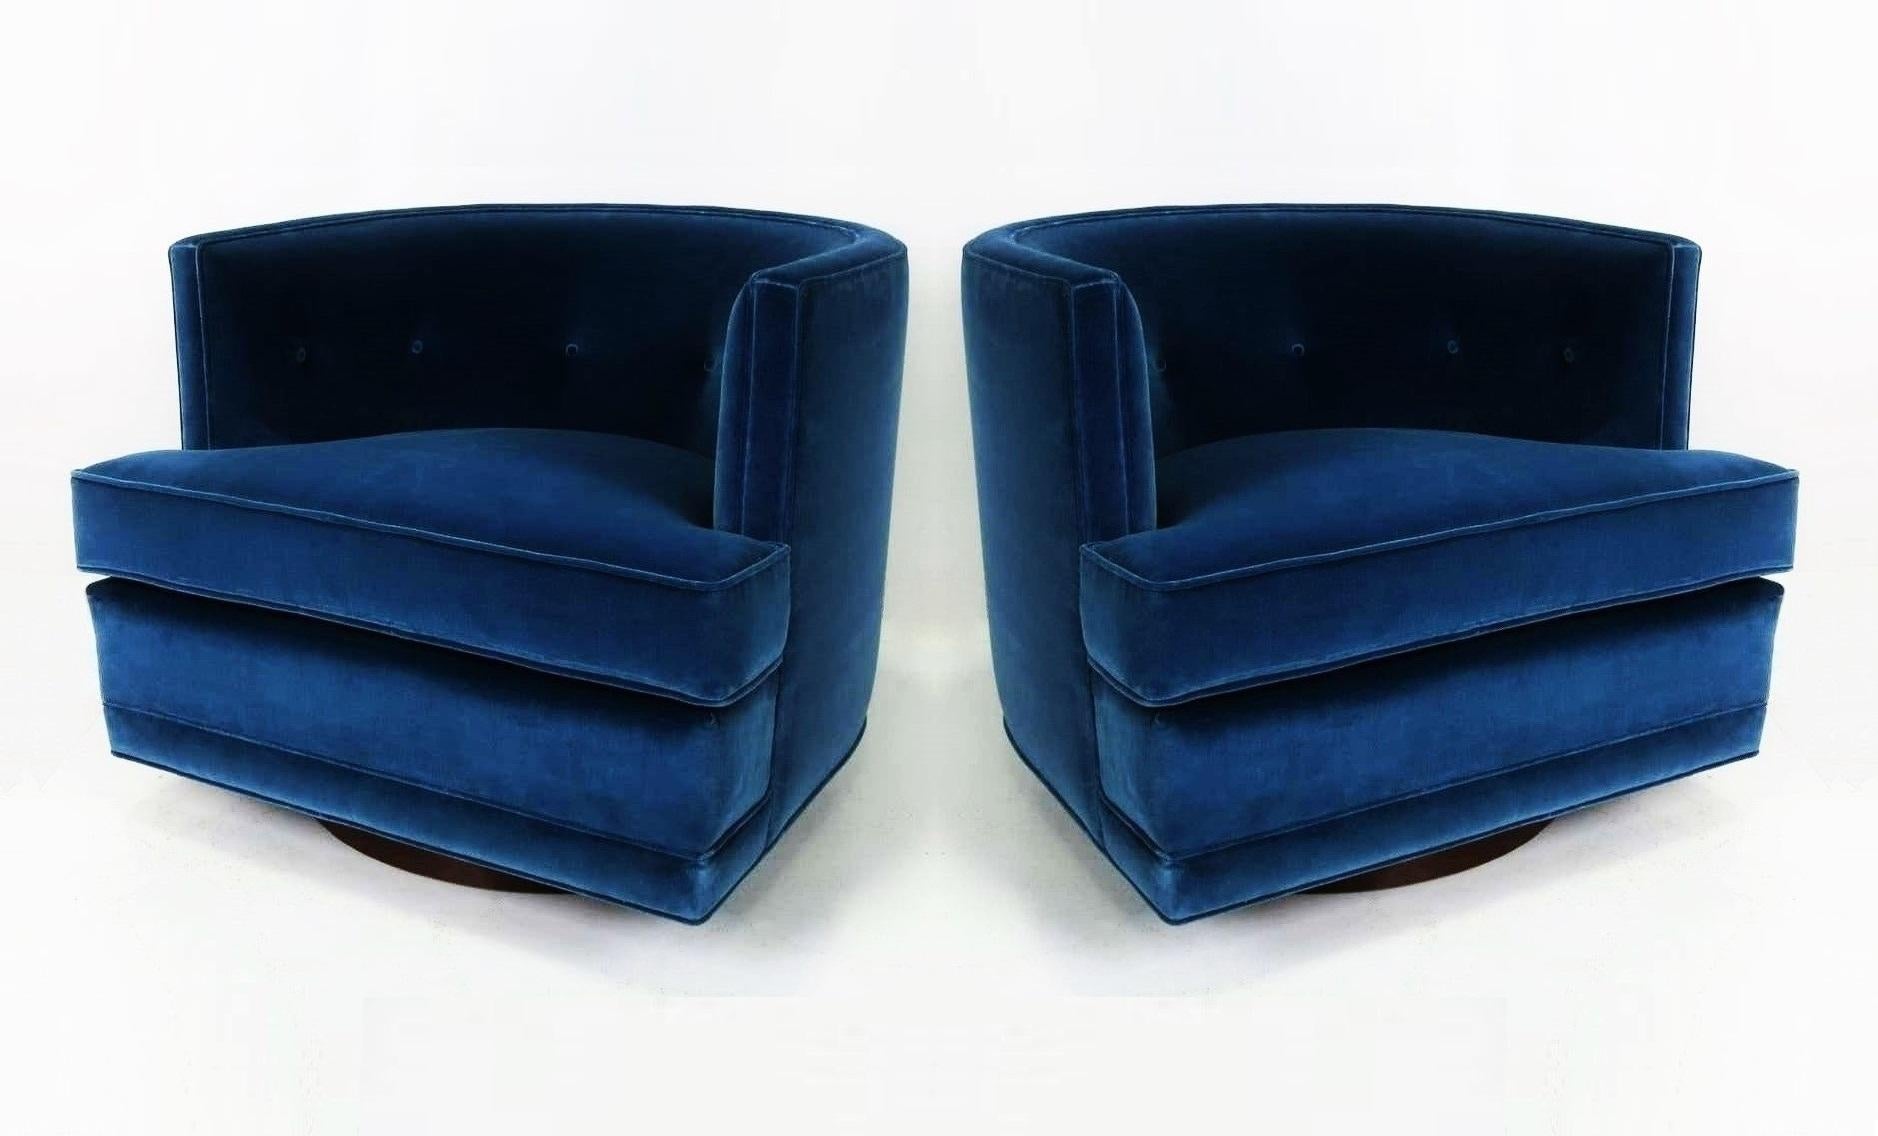 Luxurious pair of swivel lounge chairs freshly upholstered in a blue velvet. Attributed to Harvey Probber. They feature a barreled tufted back, oversized detached cushion seat and flat front aprons. All sit upon round walnut swivel bases, freshly